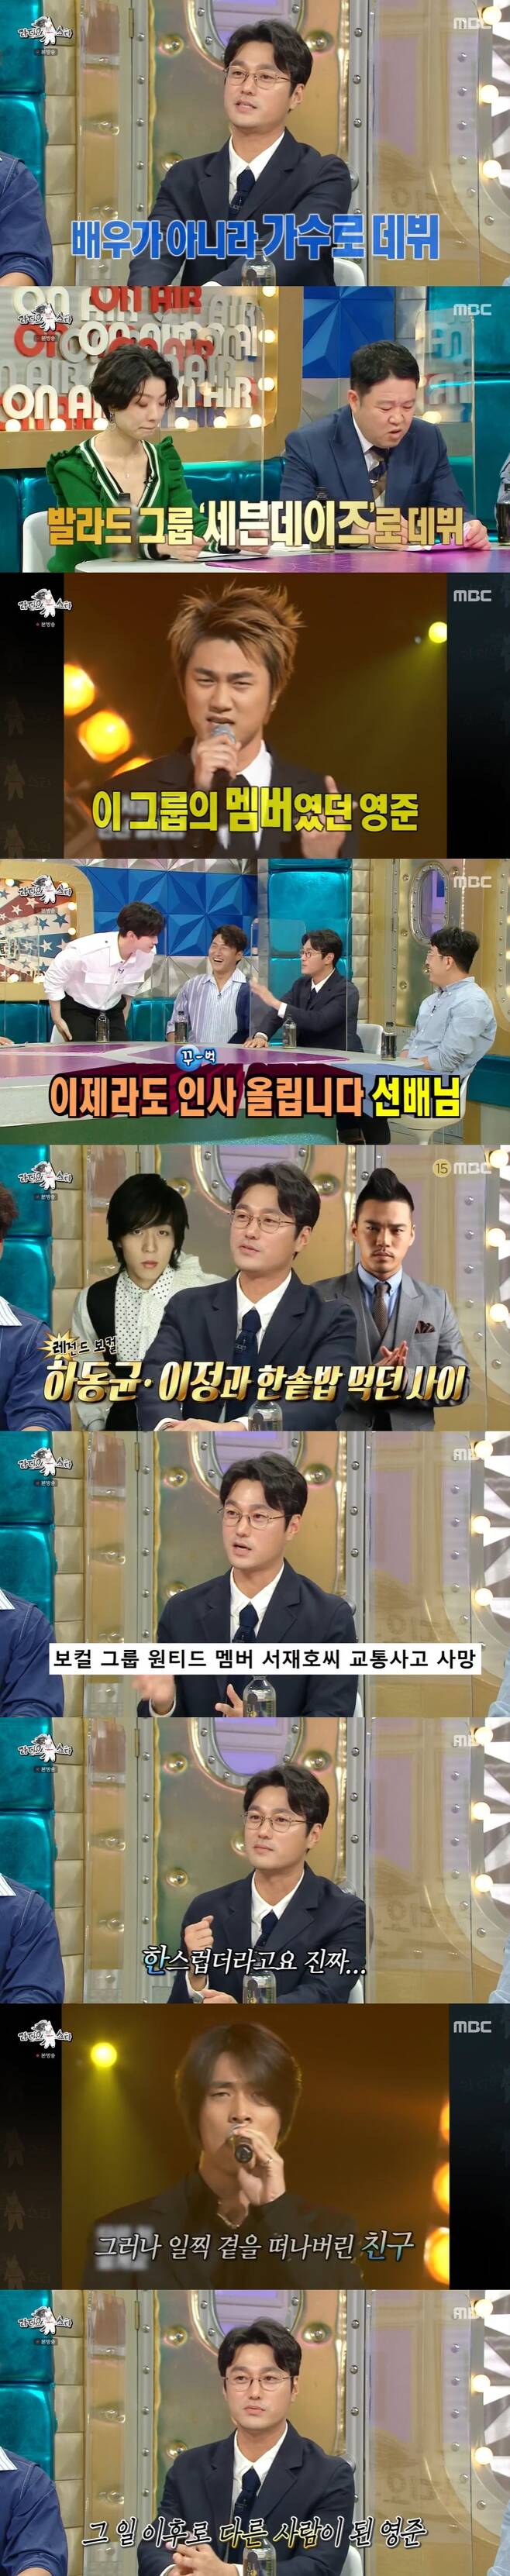 Seoul = = Choi Young-jun released the story of becoming an actor after debuting as a singer.Choi Young-jun was a guest in MBC entertainment program Radio Star broadcast on the last three days, and it was said that I actually debuted as a singer rather than an actor.Choi Young-jun said, I have been a singer for about three years, and informed him that he was a member of the ballad group Seven Days.The lead vocals were Li Jing, and I played a leader because I had a lot of Age. Why did the singer quit? asked MCs, frankly, It didnt work out. The rookie said we should avoid big events, but there was a World Cup in 2002.I can not get a schedule because it is a ballad. What is it about going to the quarter-finals, of course, I was good, he laughed.Choi Young-jun said, I had made a quick song in a hurry, but it did not work out.Li Jing was solo, and Ha Dong Kyun went to Wanted. I think I ate my heart at that time, I want to try Acting, he said.I went to the dream I wanted, but I regret the most. Choi Young-jun mentioned the late Seo Jae-ho, a member of the Wanted who died in a car accident.I refused to join the Wanted, but it was good to have friends. I was happy dreaming of Acting.Seo Jae-ho went to the sky and I was sorry that I could not be with him. Why would I refuse it? I would be with him, I would have been able to join him. Choi Young-jun has since confessed that his appearance has changed.I do not have confidence because I have changed my mind, my personality and my tone, he said. It was much more active in the original way, but I seem to be careful after that.In addition, I feel like Jaeho has given me time to write.So we are doing well in our place, I think we should live hard because we seem to have given our blessings. 